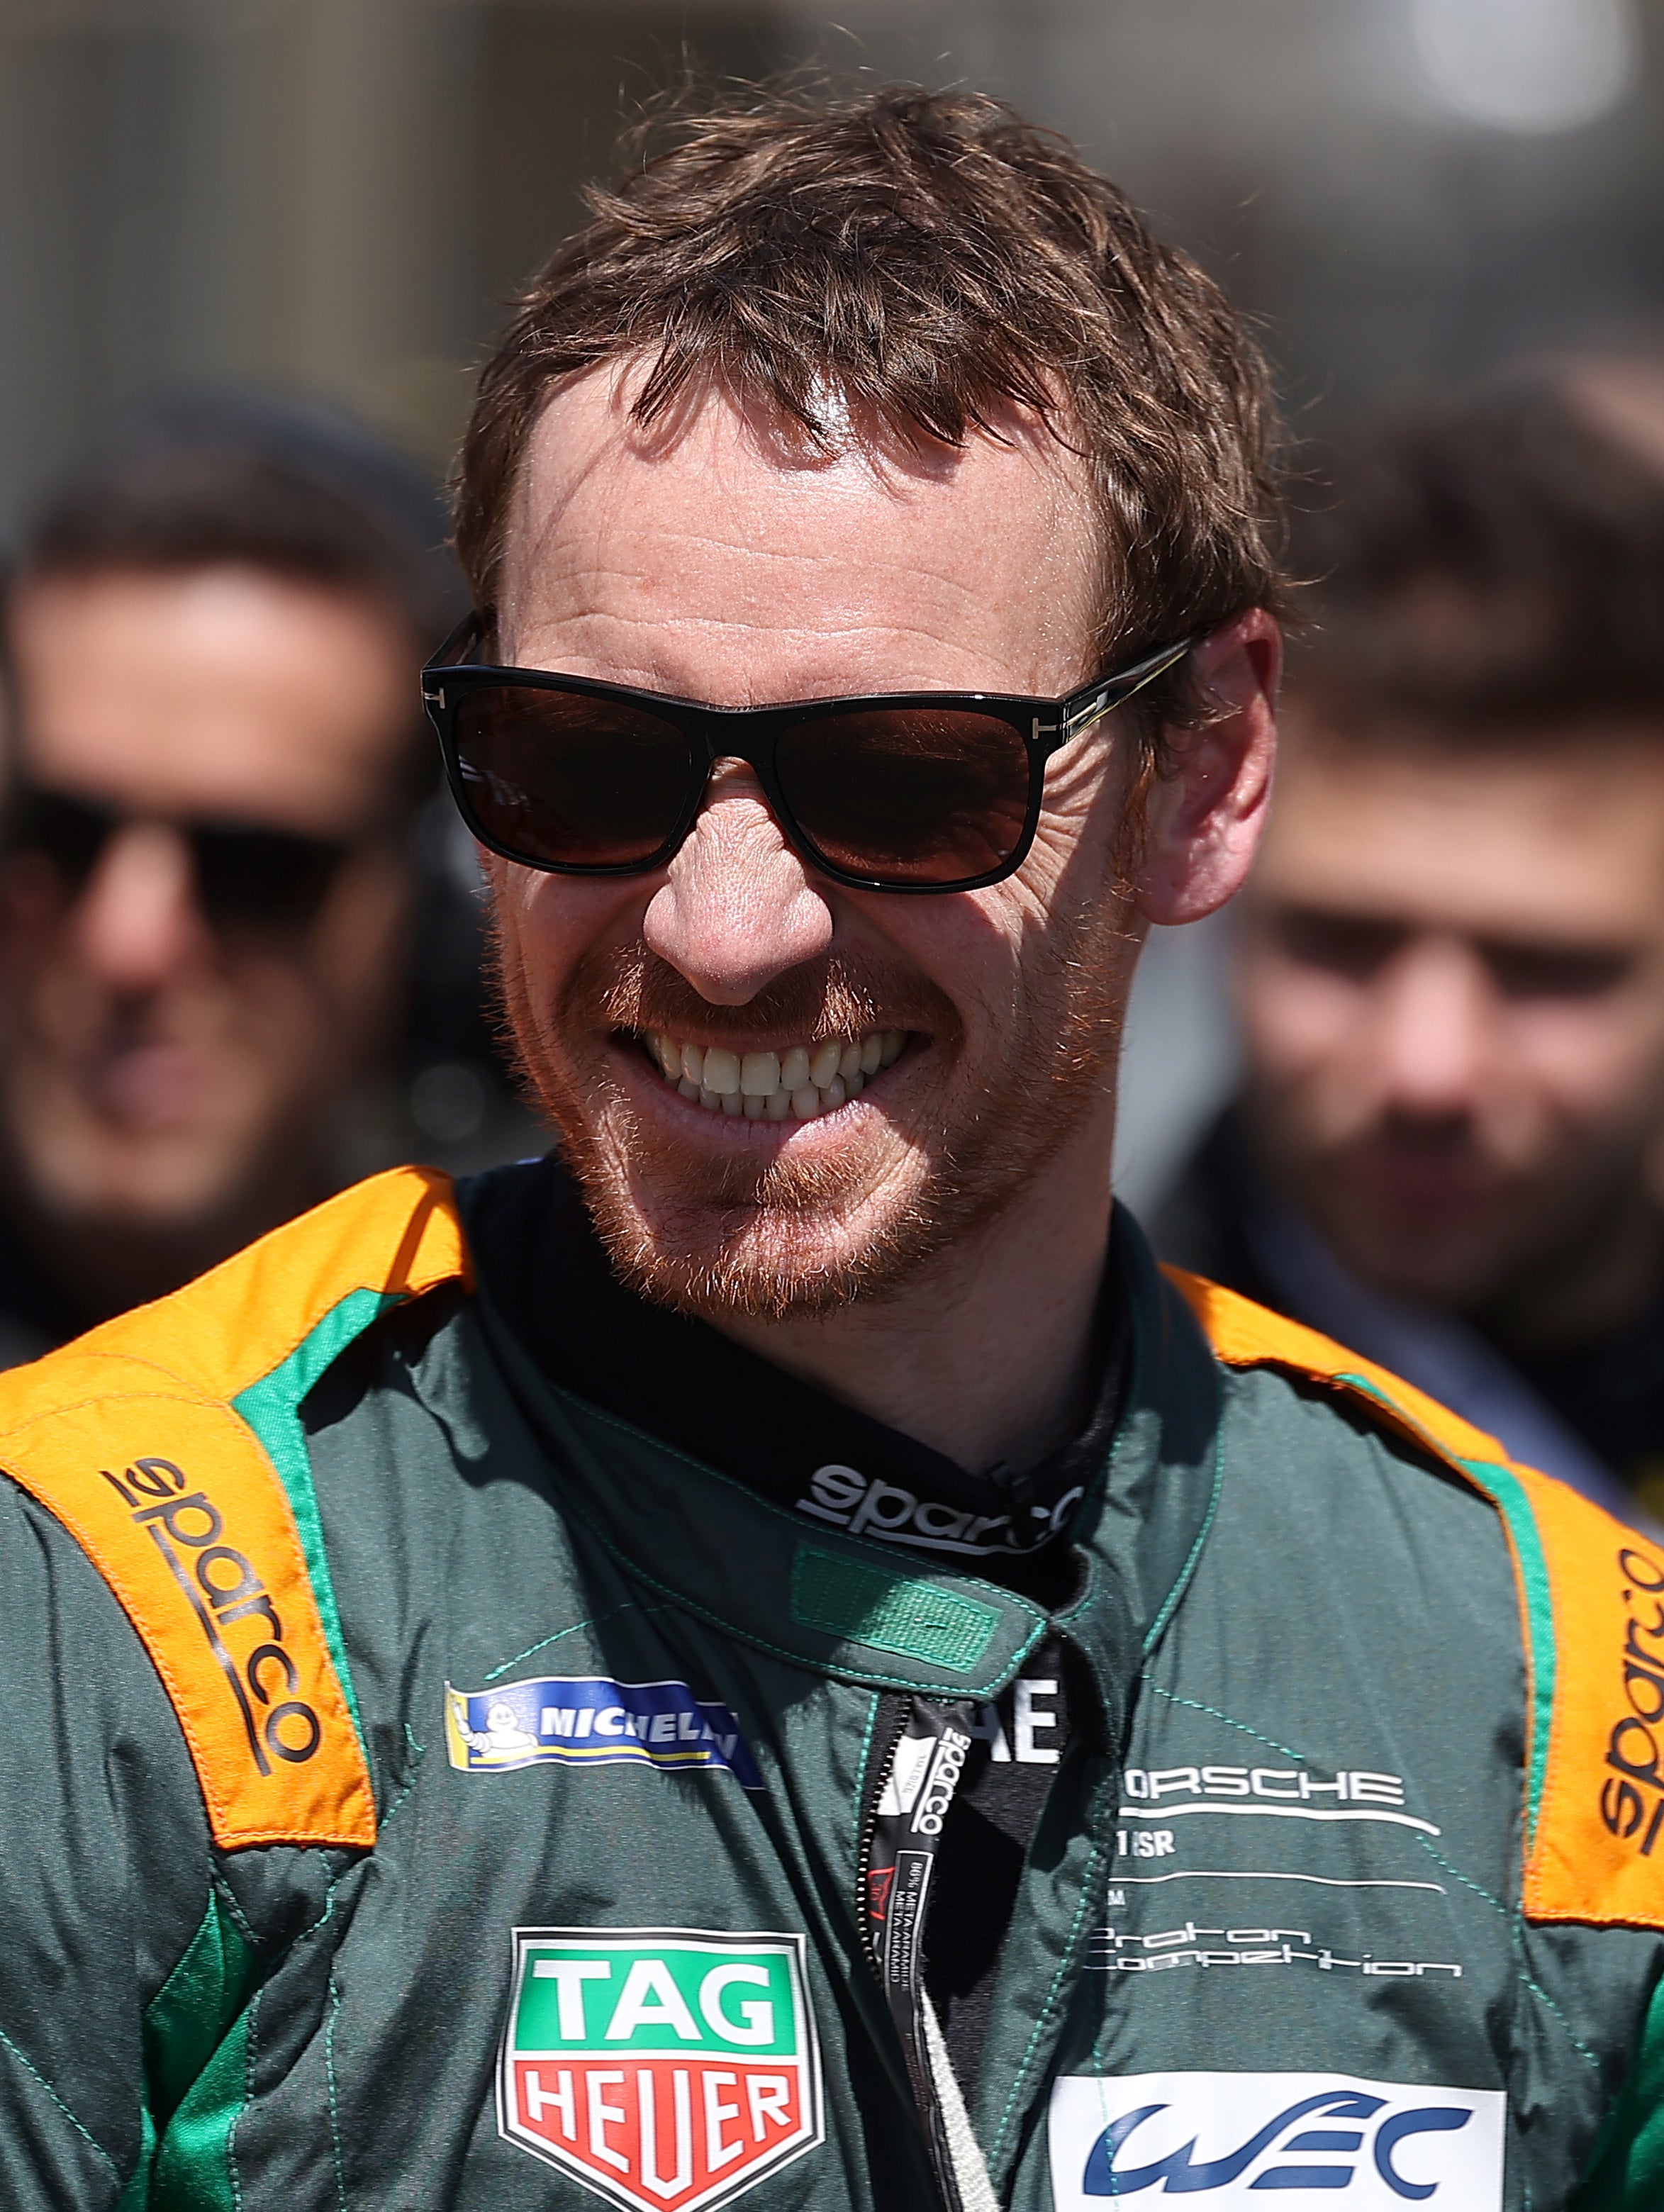 Close-up of Michael smiling and wearing a uniform as a race car driver